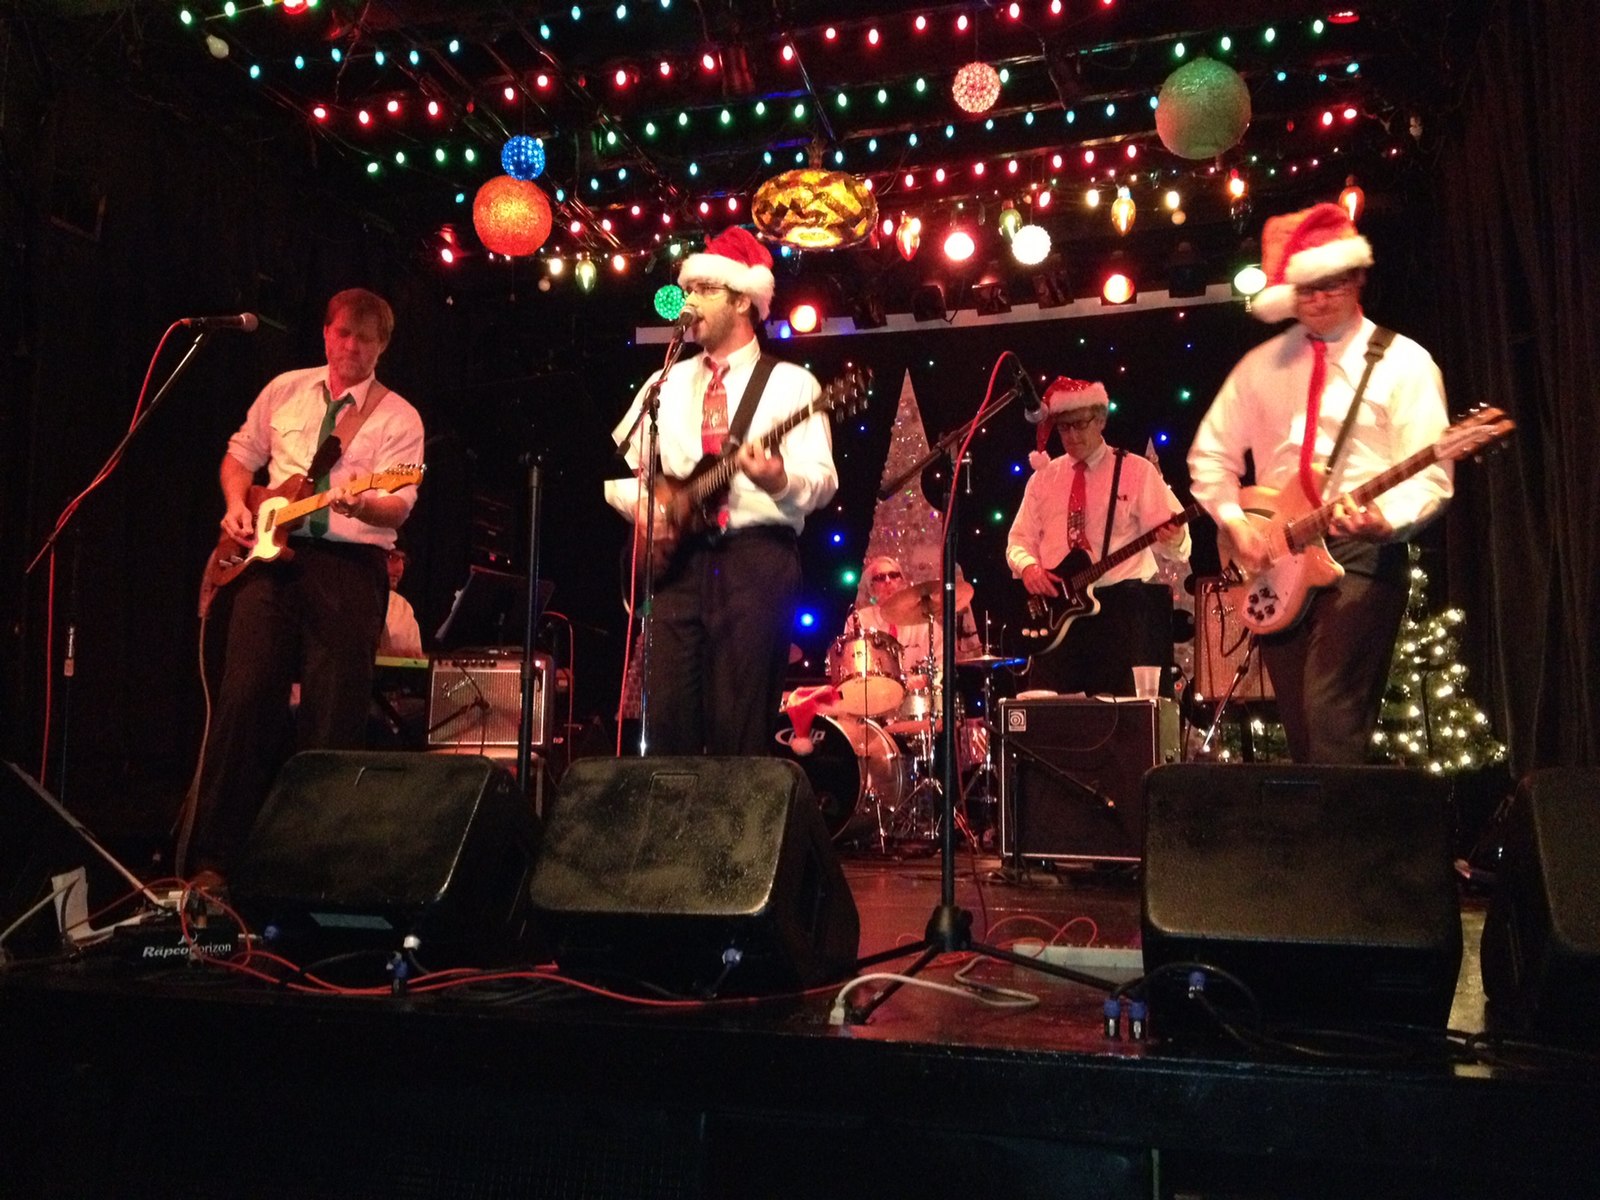 The four-man rock band Buzz Killingtons performs in Santa hats like a bunch of dorks.